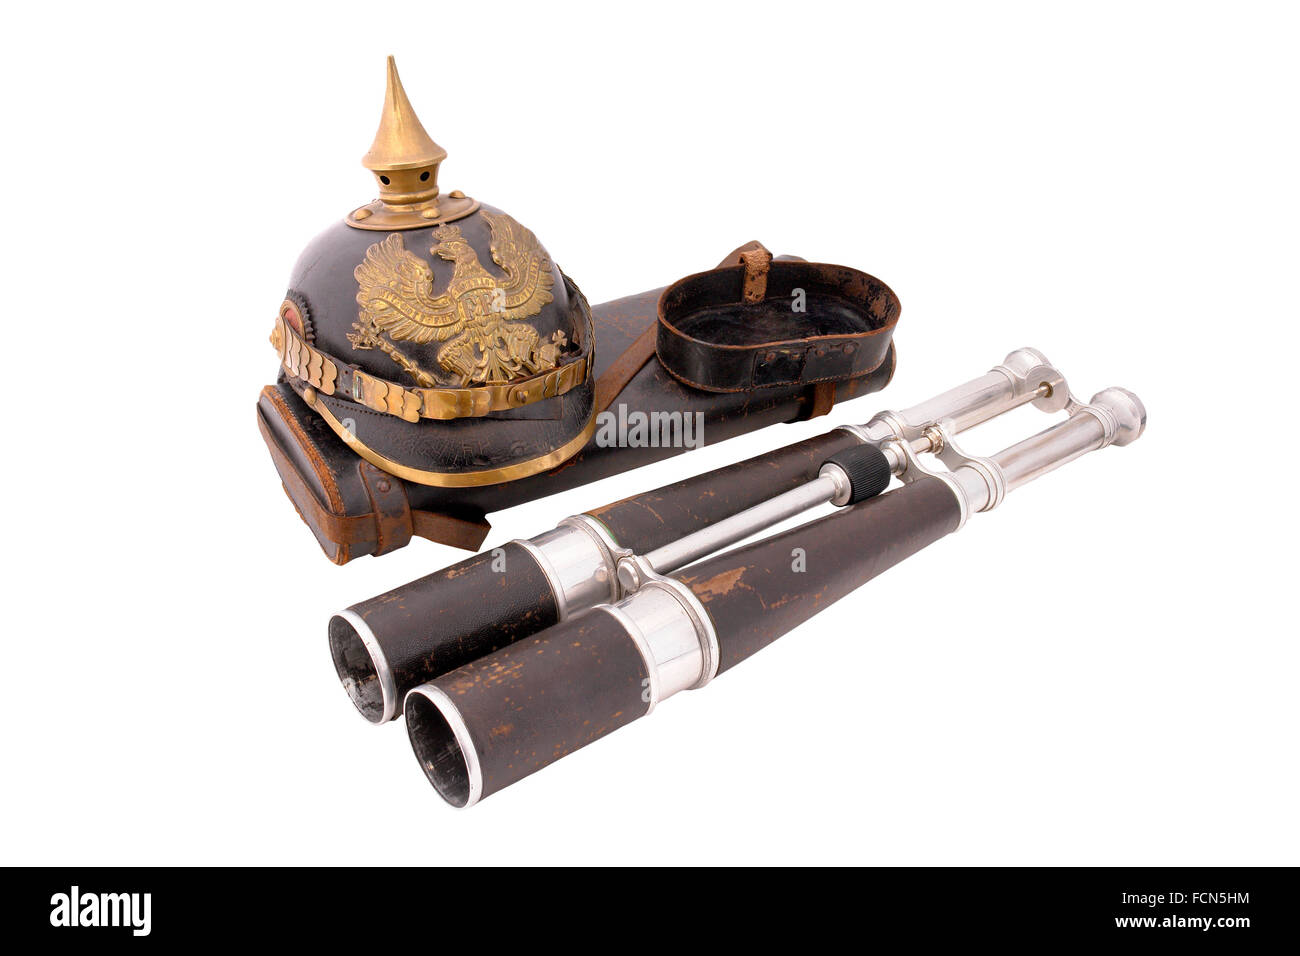 19th century binocular of dirigible (Zeppelin) captain with leather case. Germany, France. Stock Photo